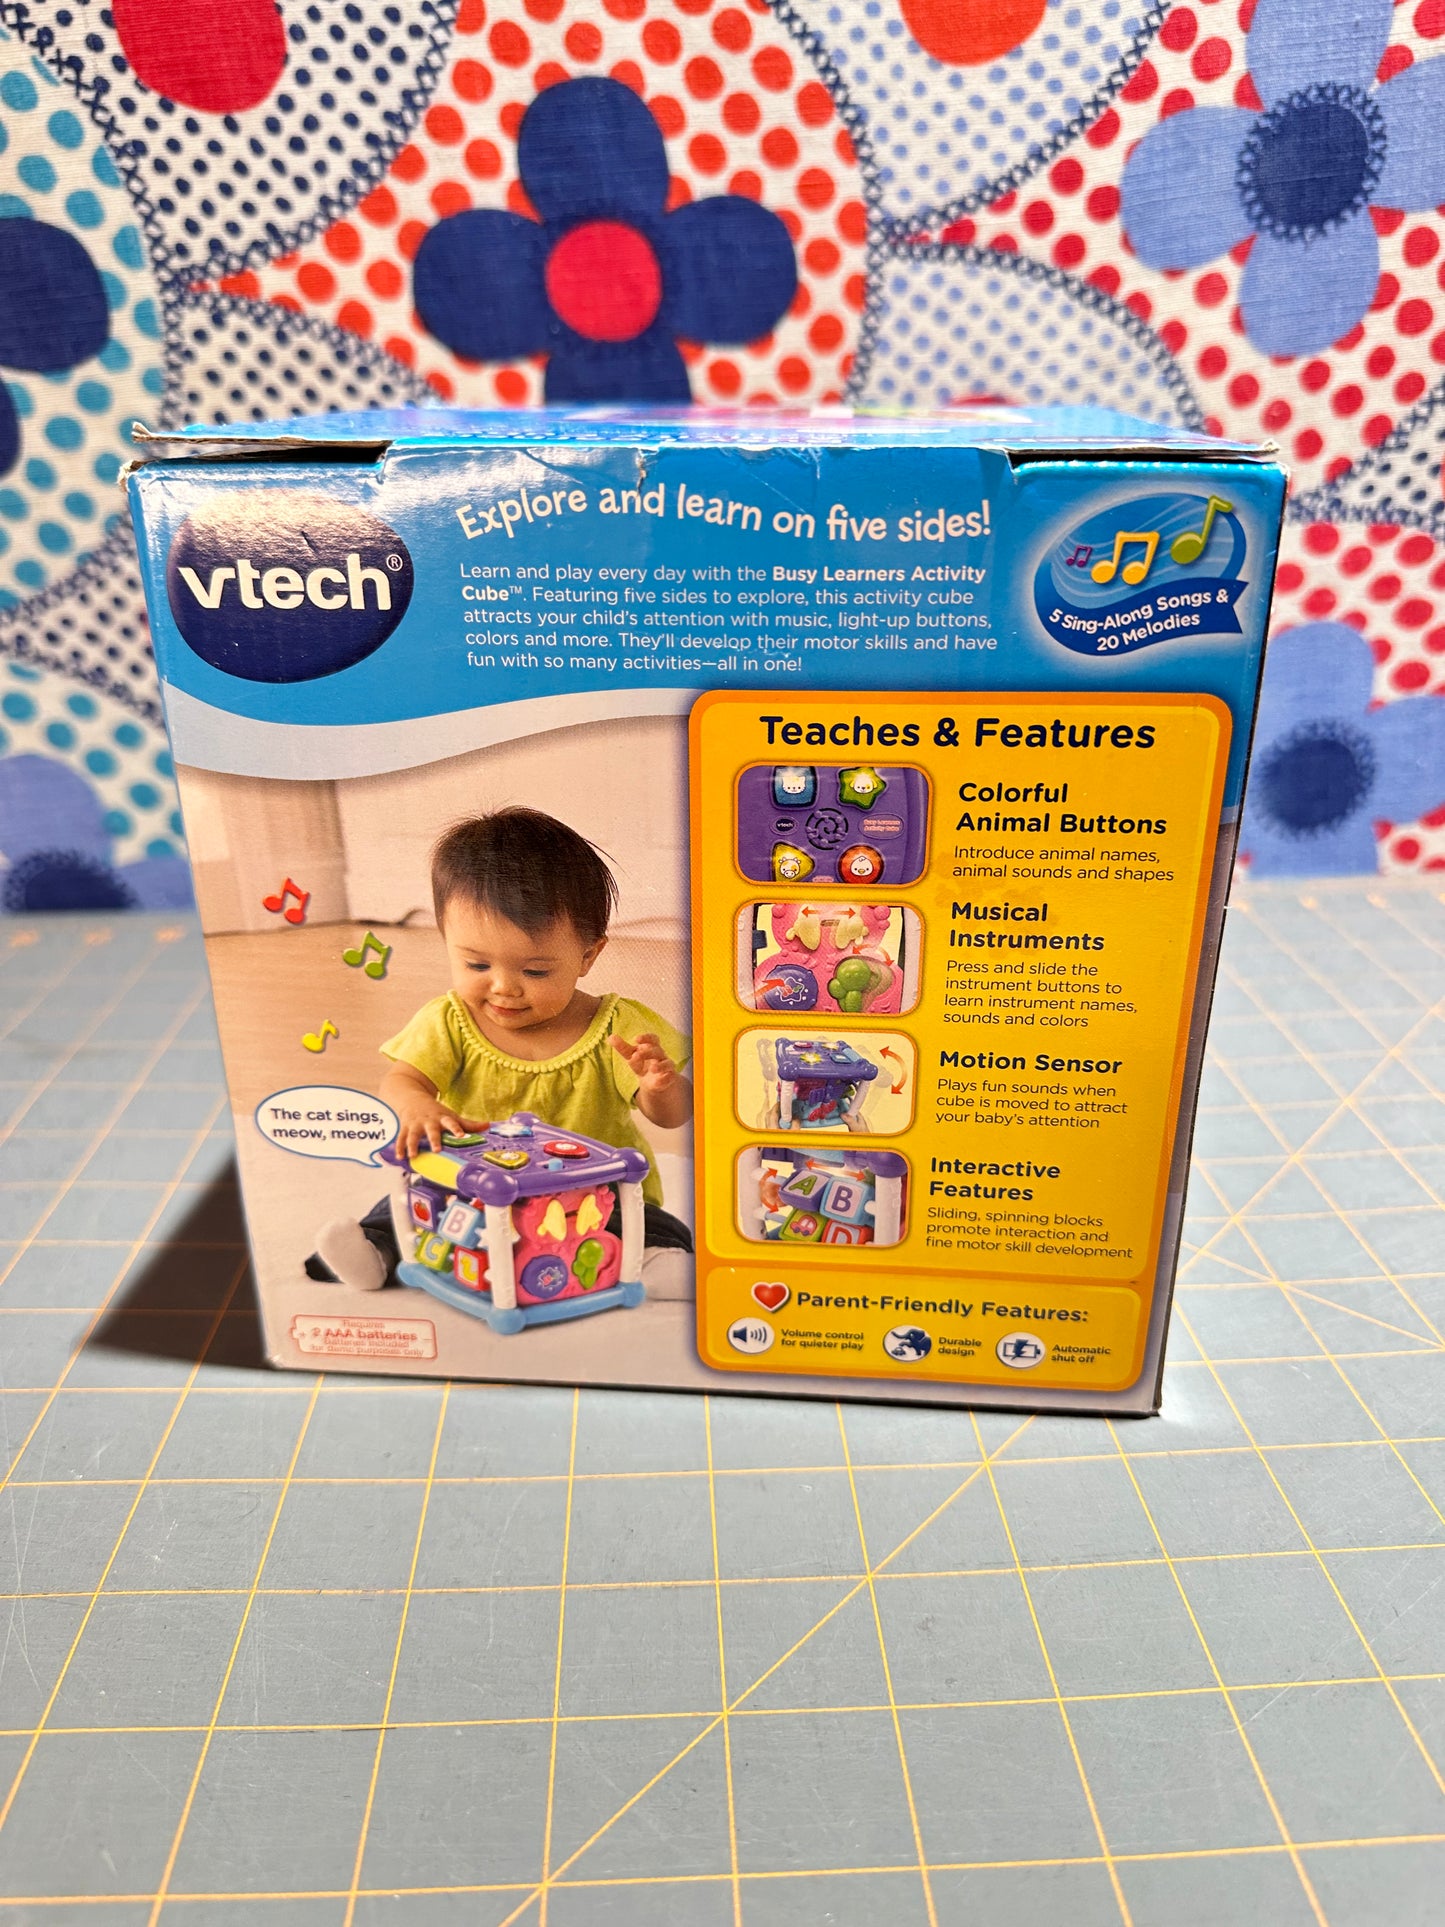 VTech Busy Learners Activity Cube, New